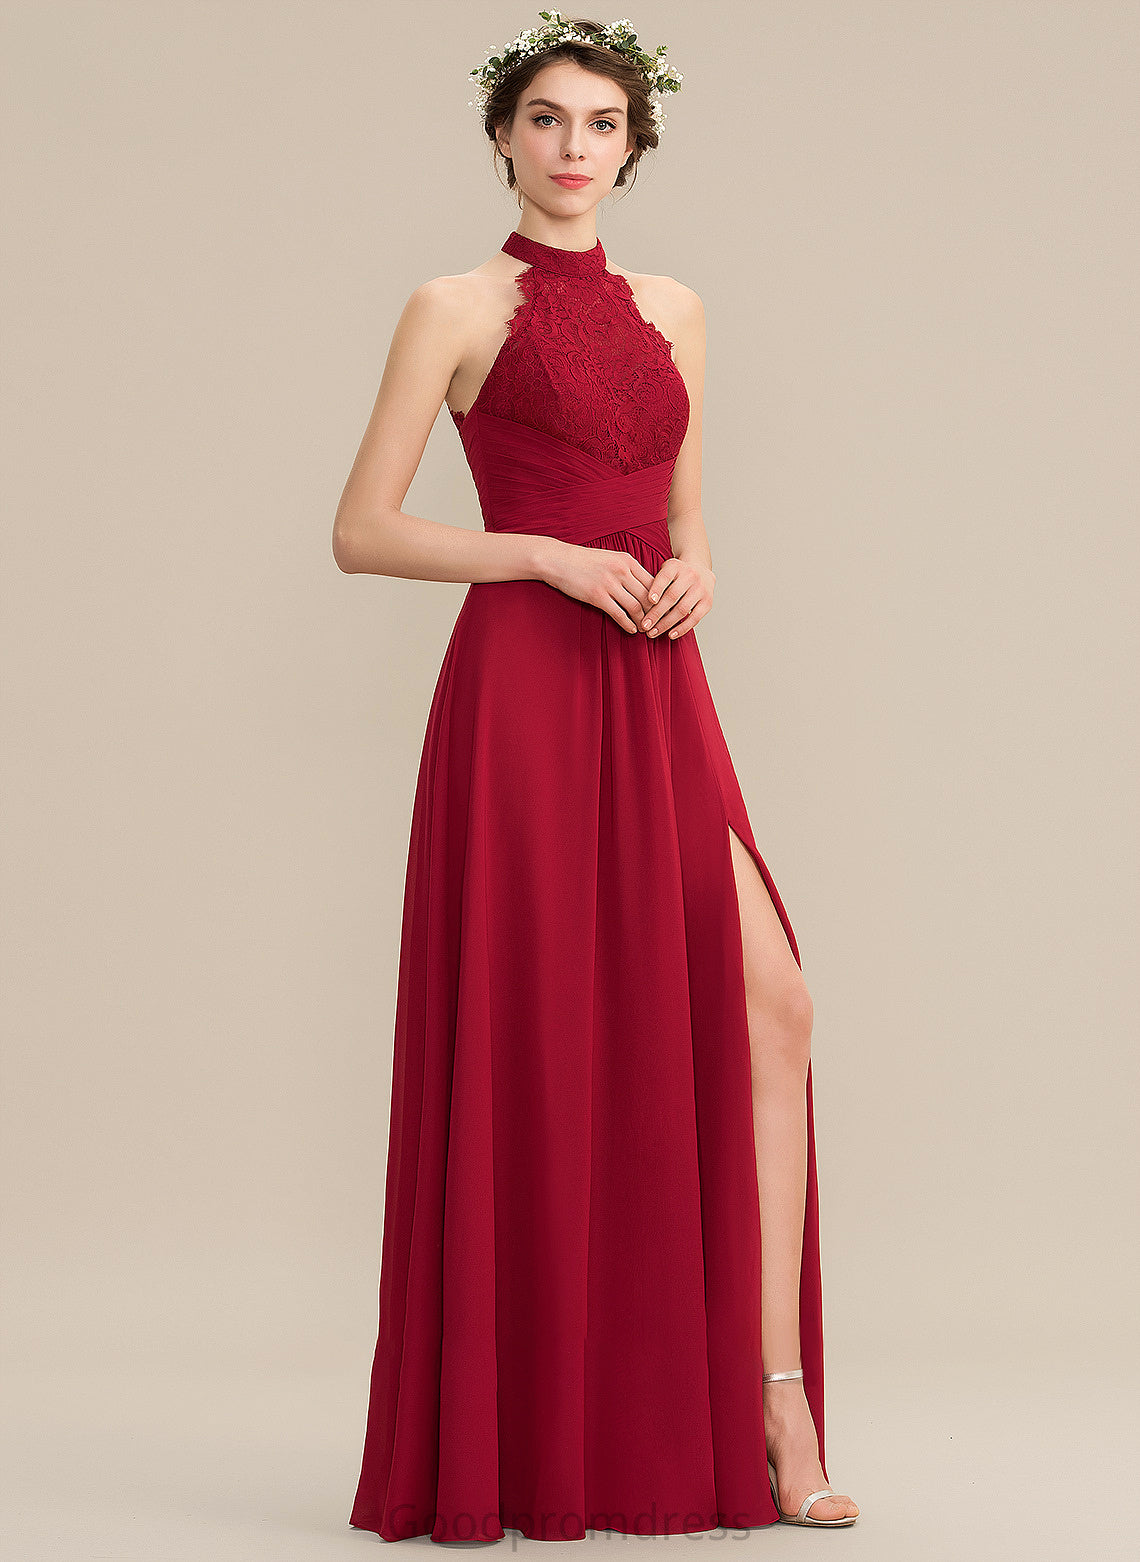 Lace Ruffle High Prom Dresses Front With Split Neck Annika A-Line Floor-Length Chiffon